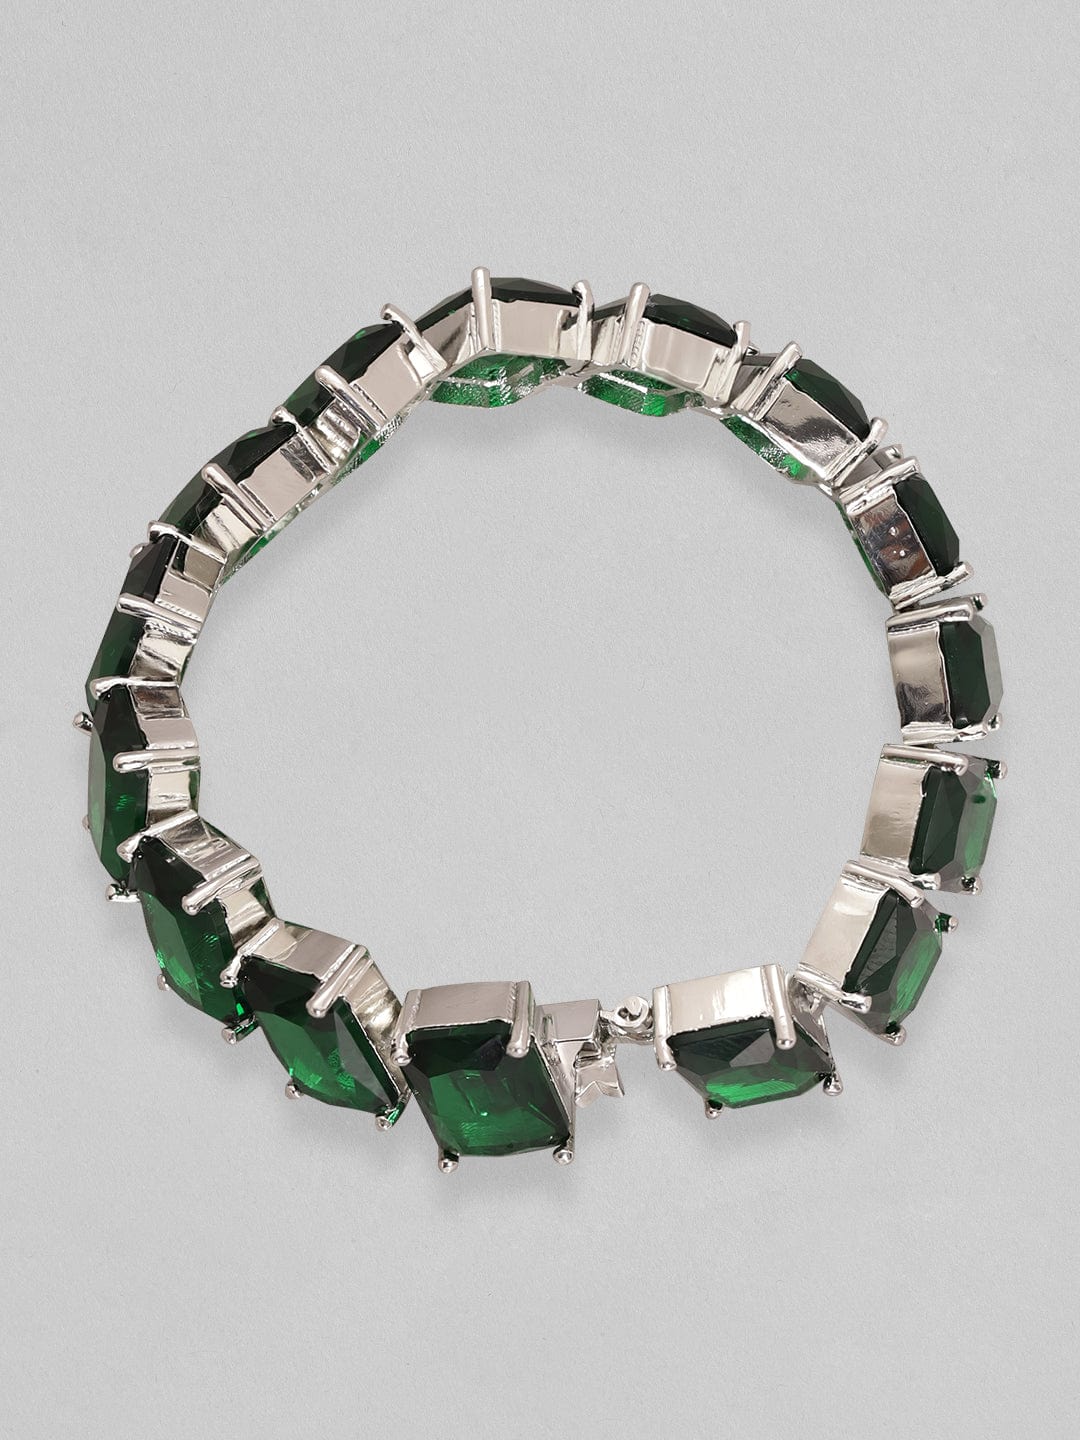 Emerald Bracelet for Strength and Power - Engineered to Heal²